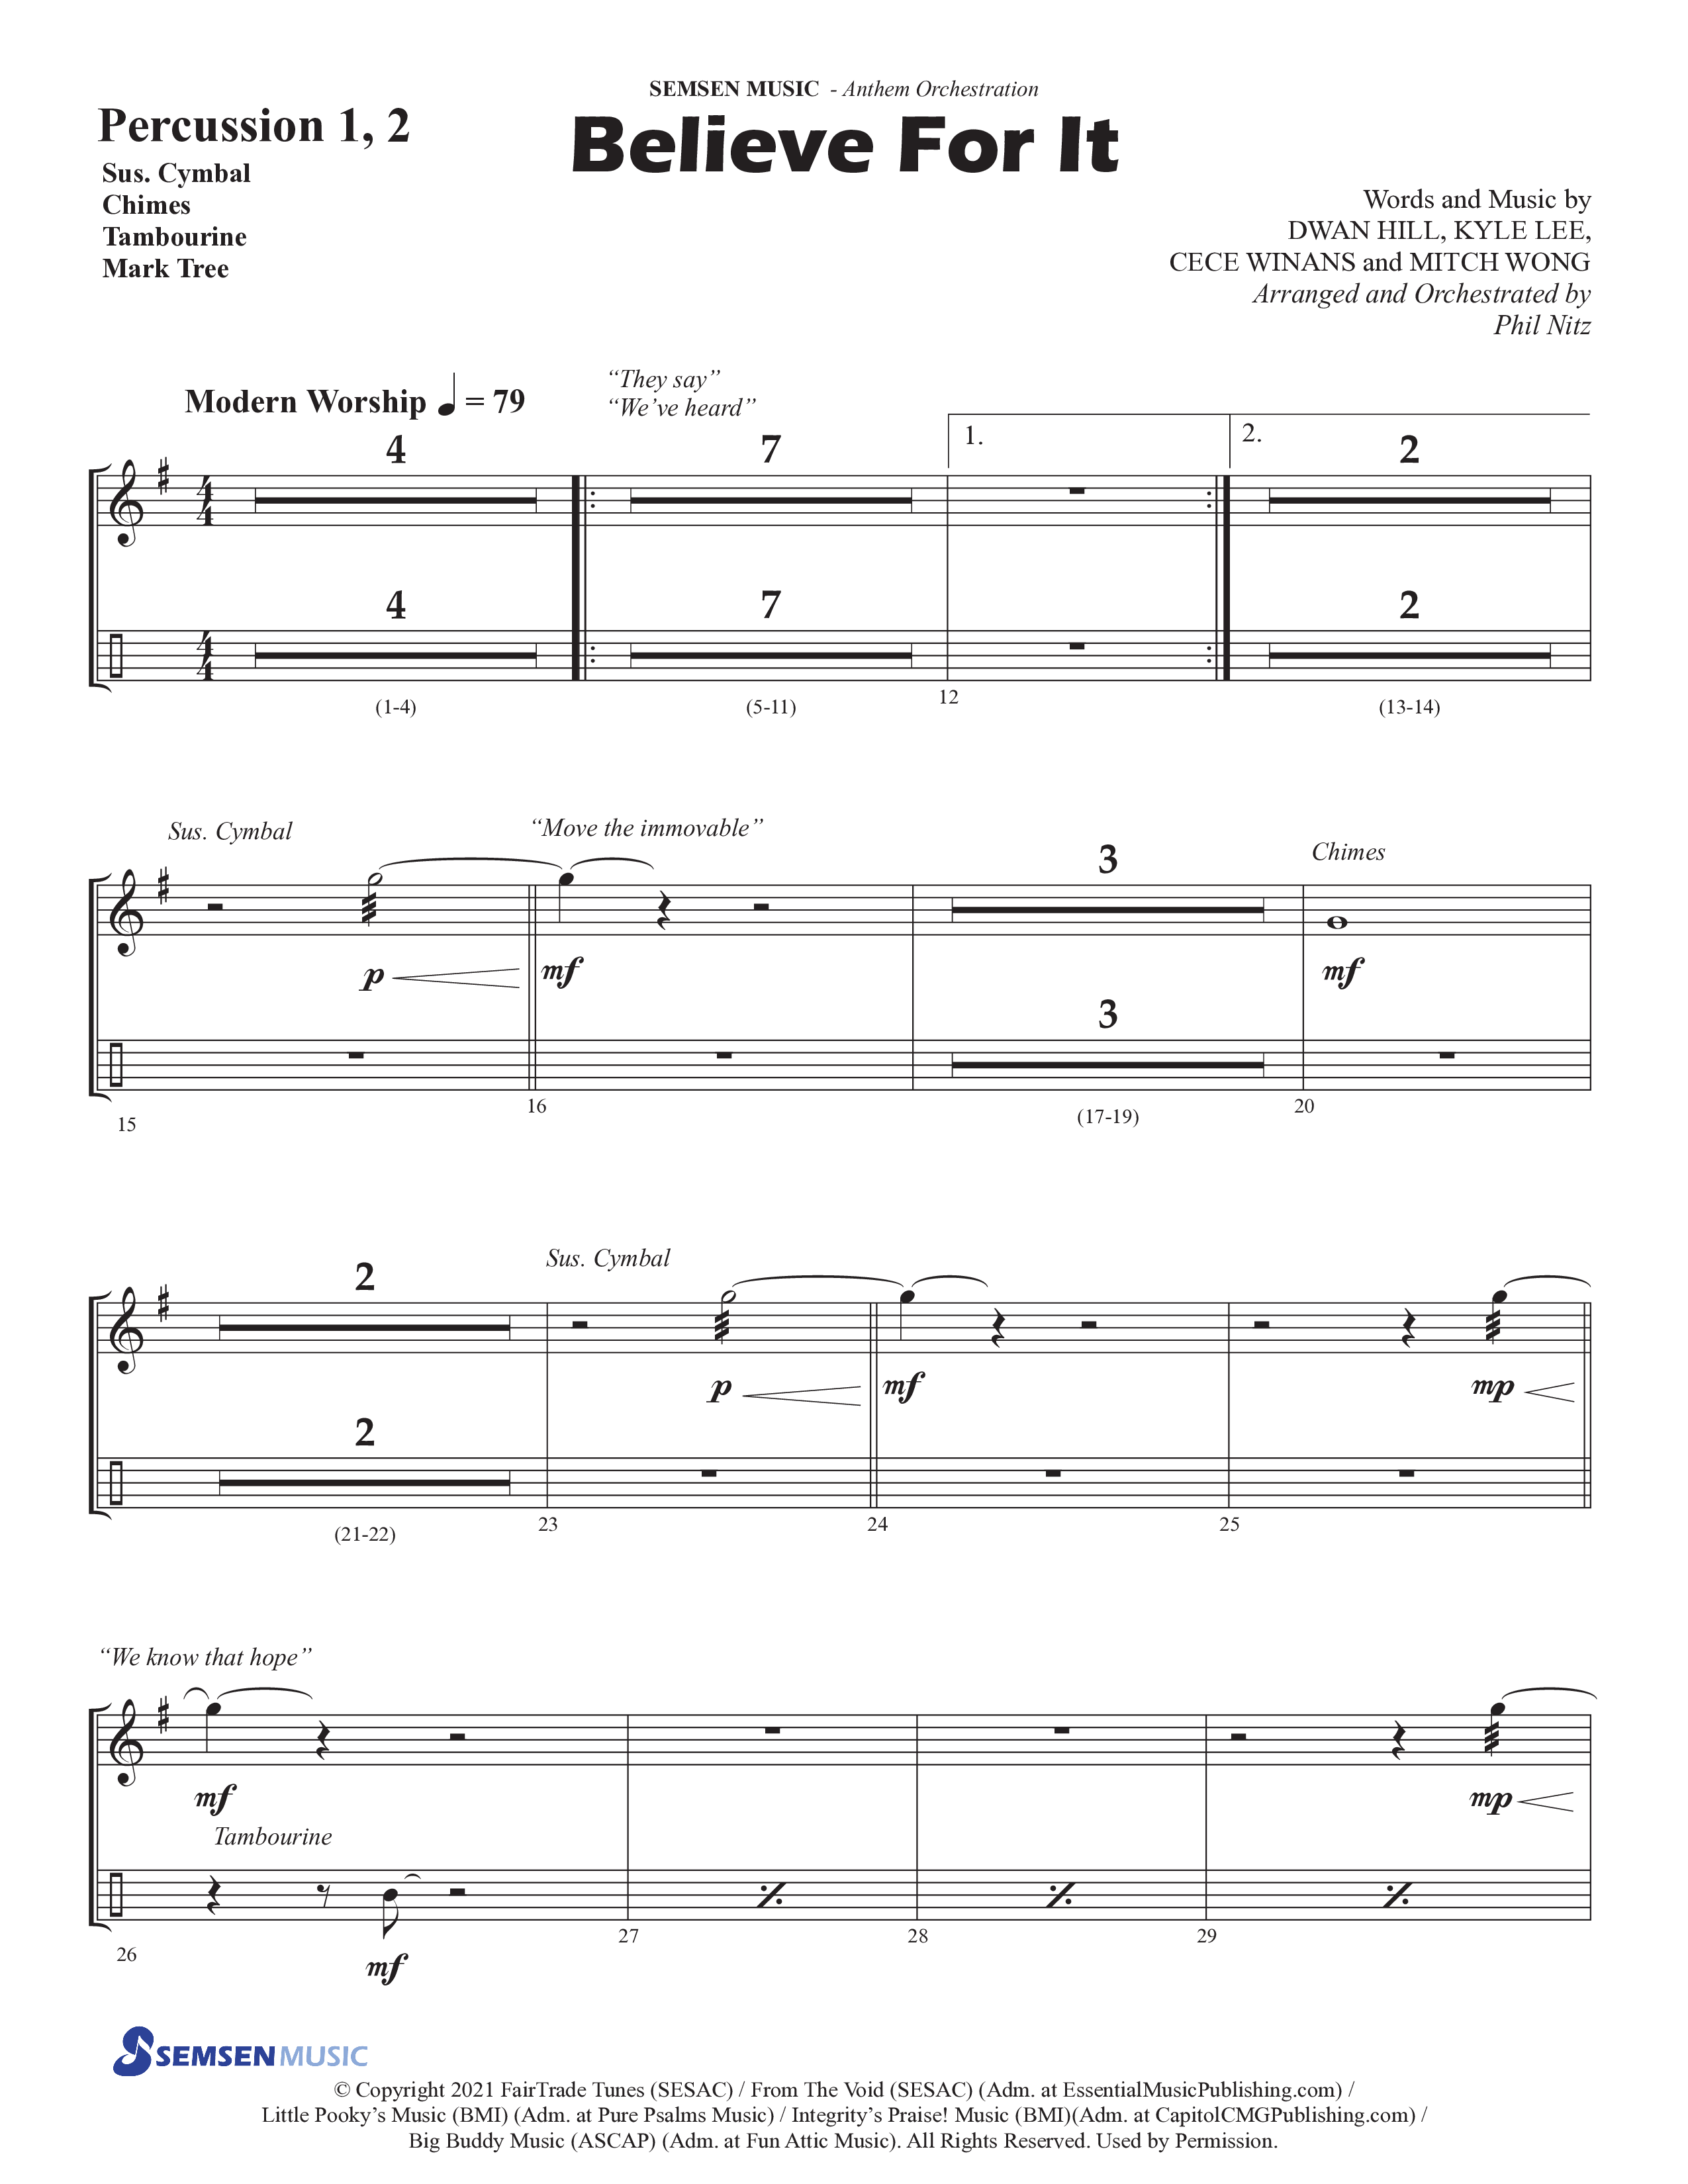 Believe For It (Choral Anthem SATB) Percussion 1/2 (Semsen Music / Arr. Phil Nitz)